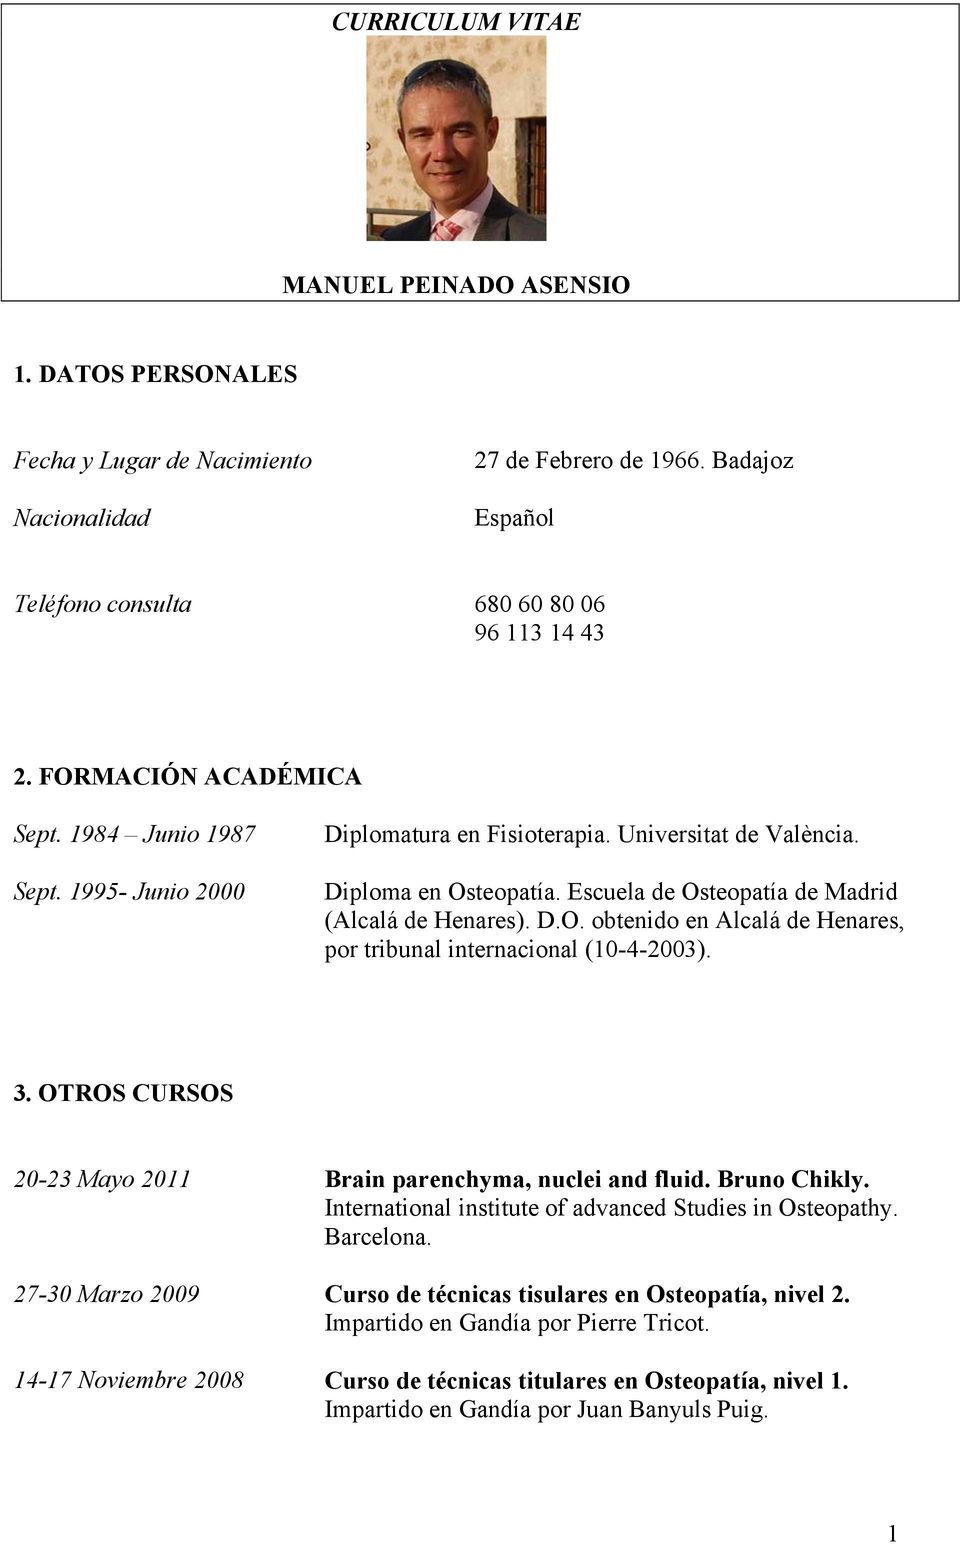 3. OTROS CURSOS 20-23 Mayo 2011 Brain parenchyma, nuclei and fluid. Bruno Chikly. International institute of advanced Studies in Osteopathy. Barcelona.